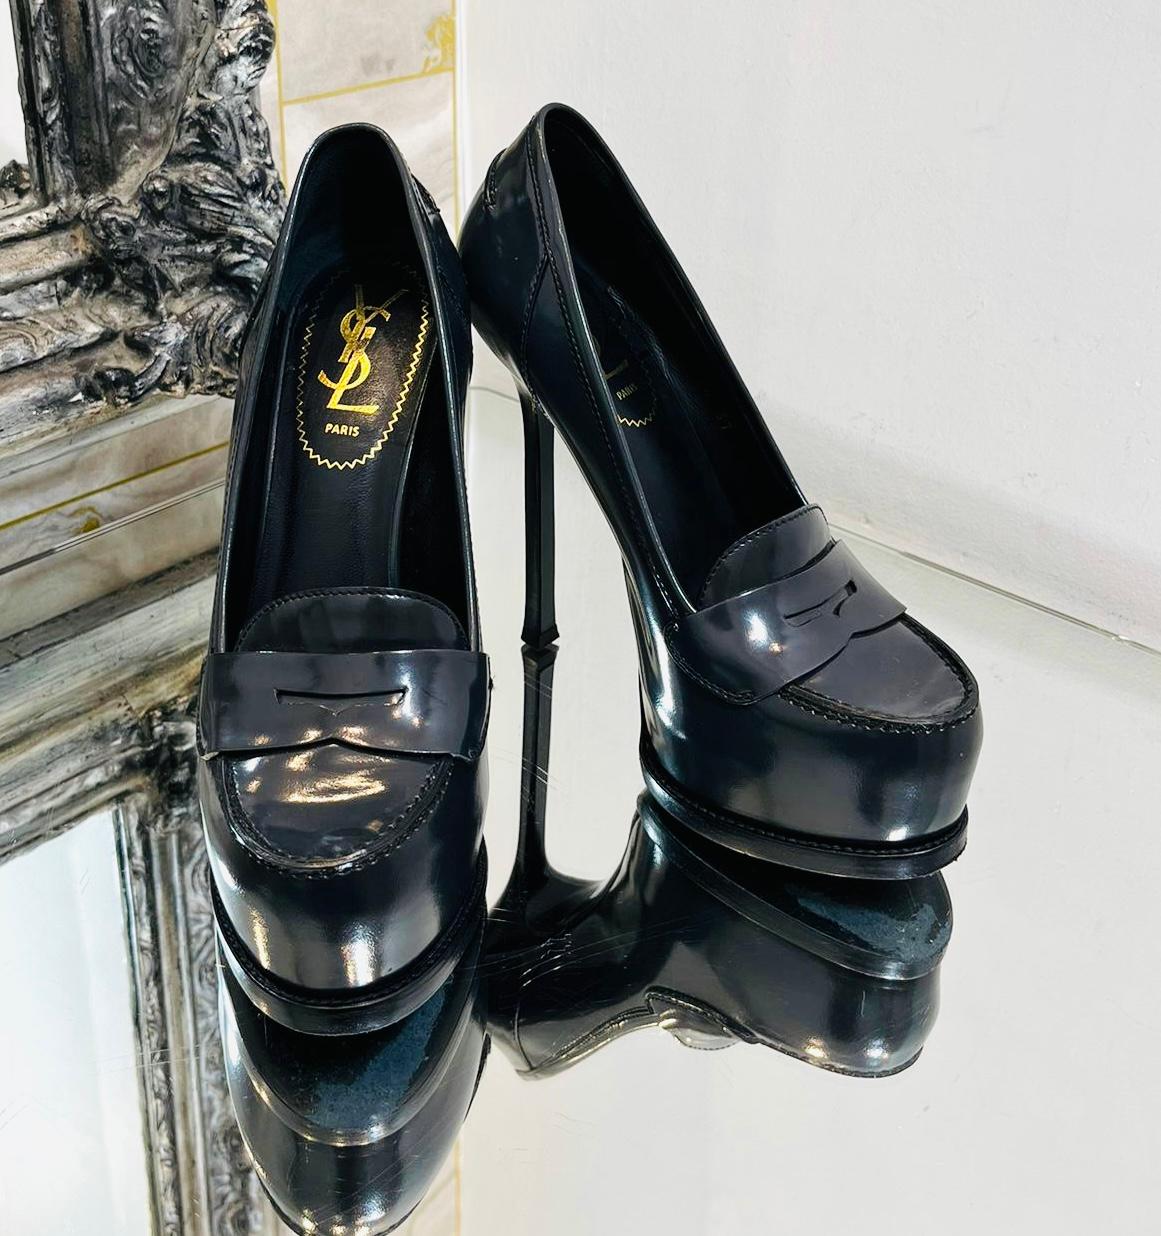 Saint Laurent Tribtoo Loafer Platform Leather Pumps In Excellent Condition For Sale In London, GB